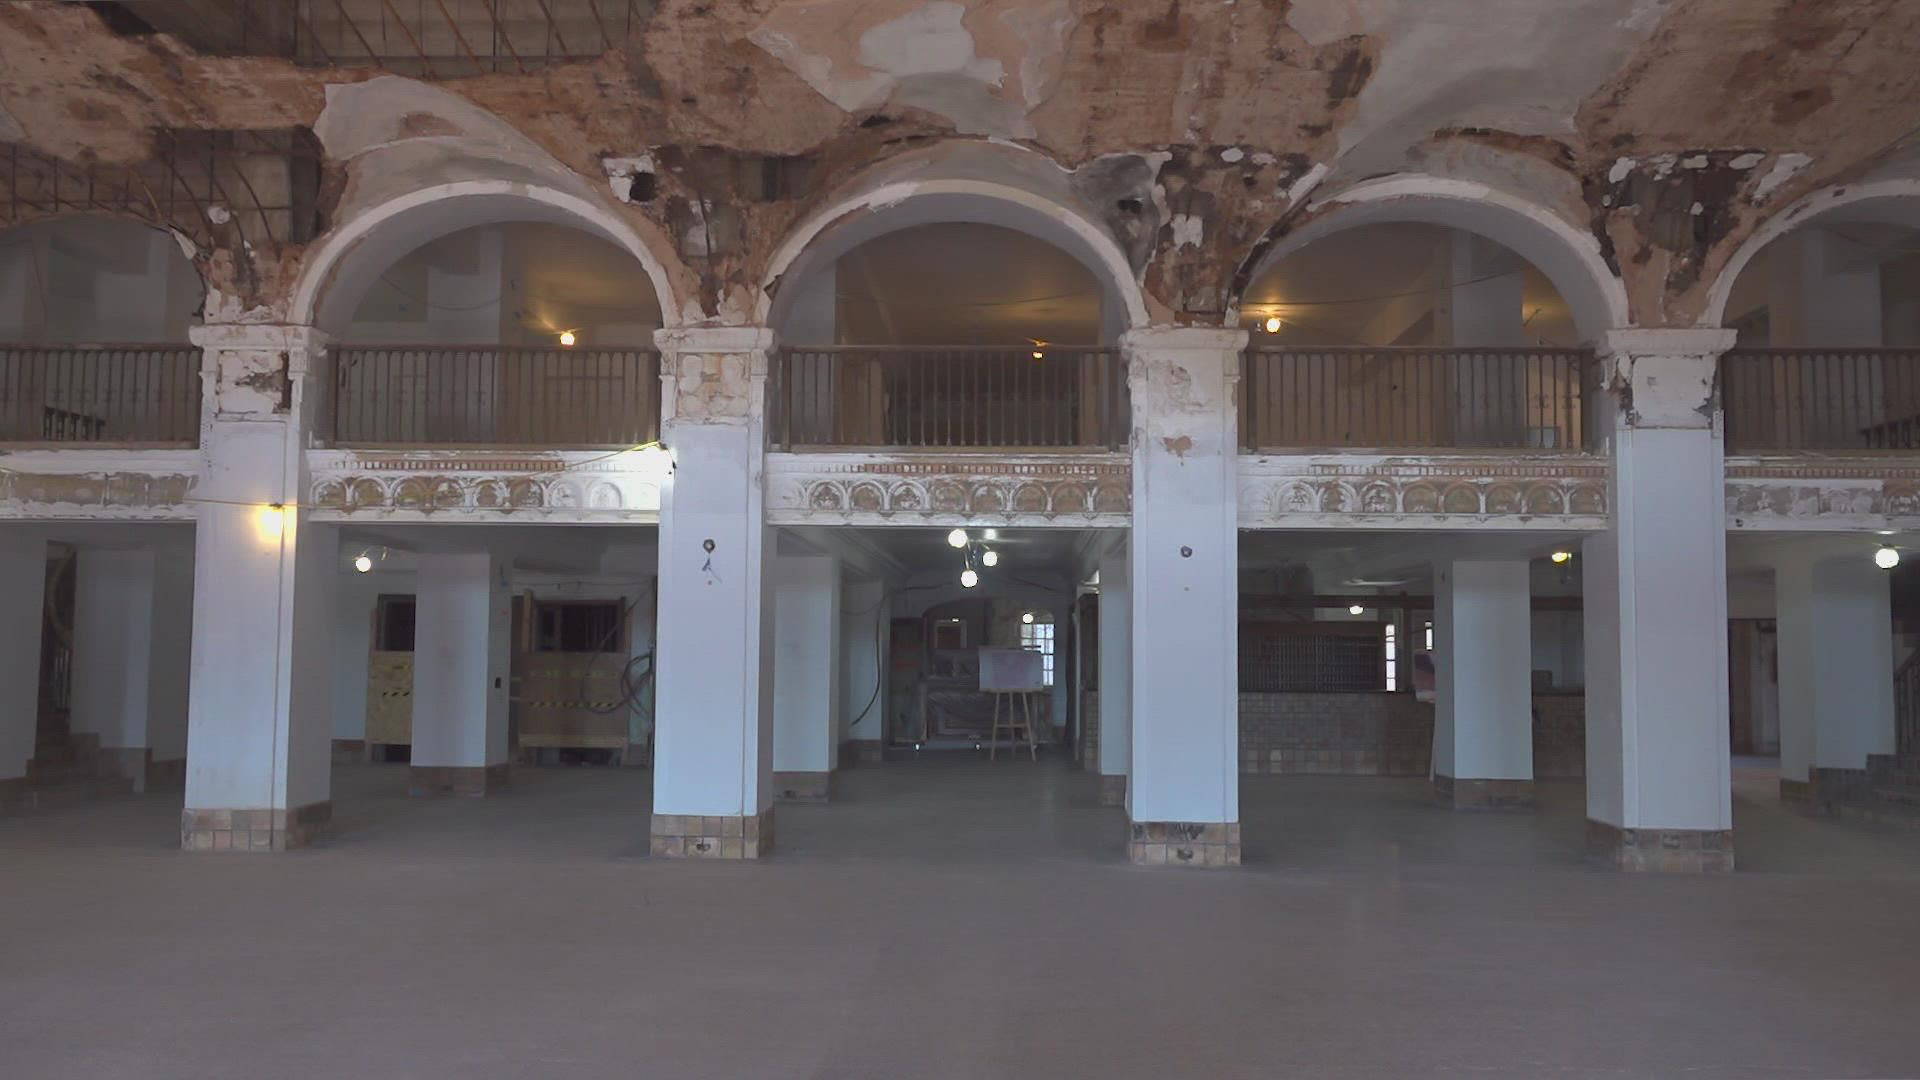 The vacated Baker Hotel in Mineral Wells features ghosts you can...smell.